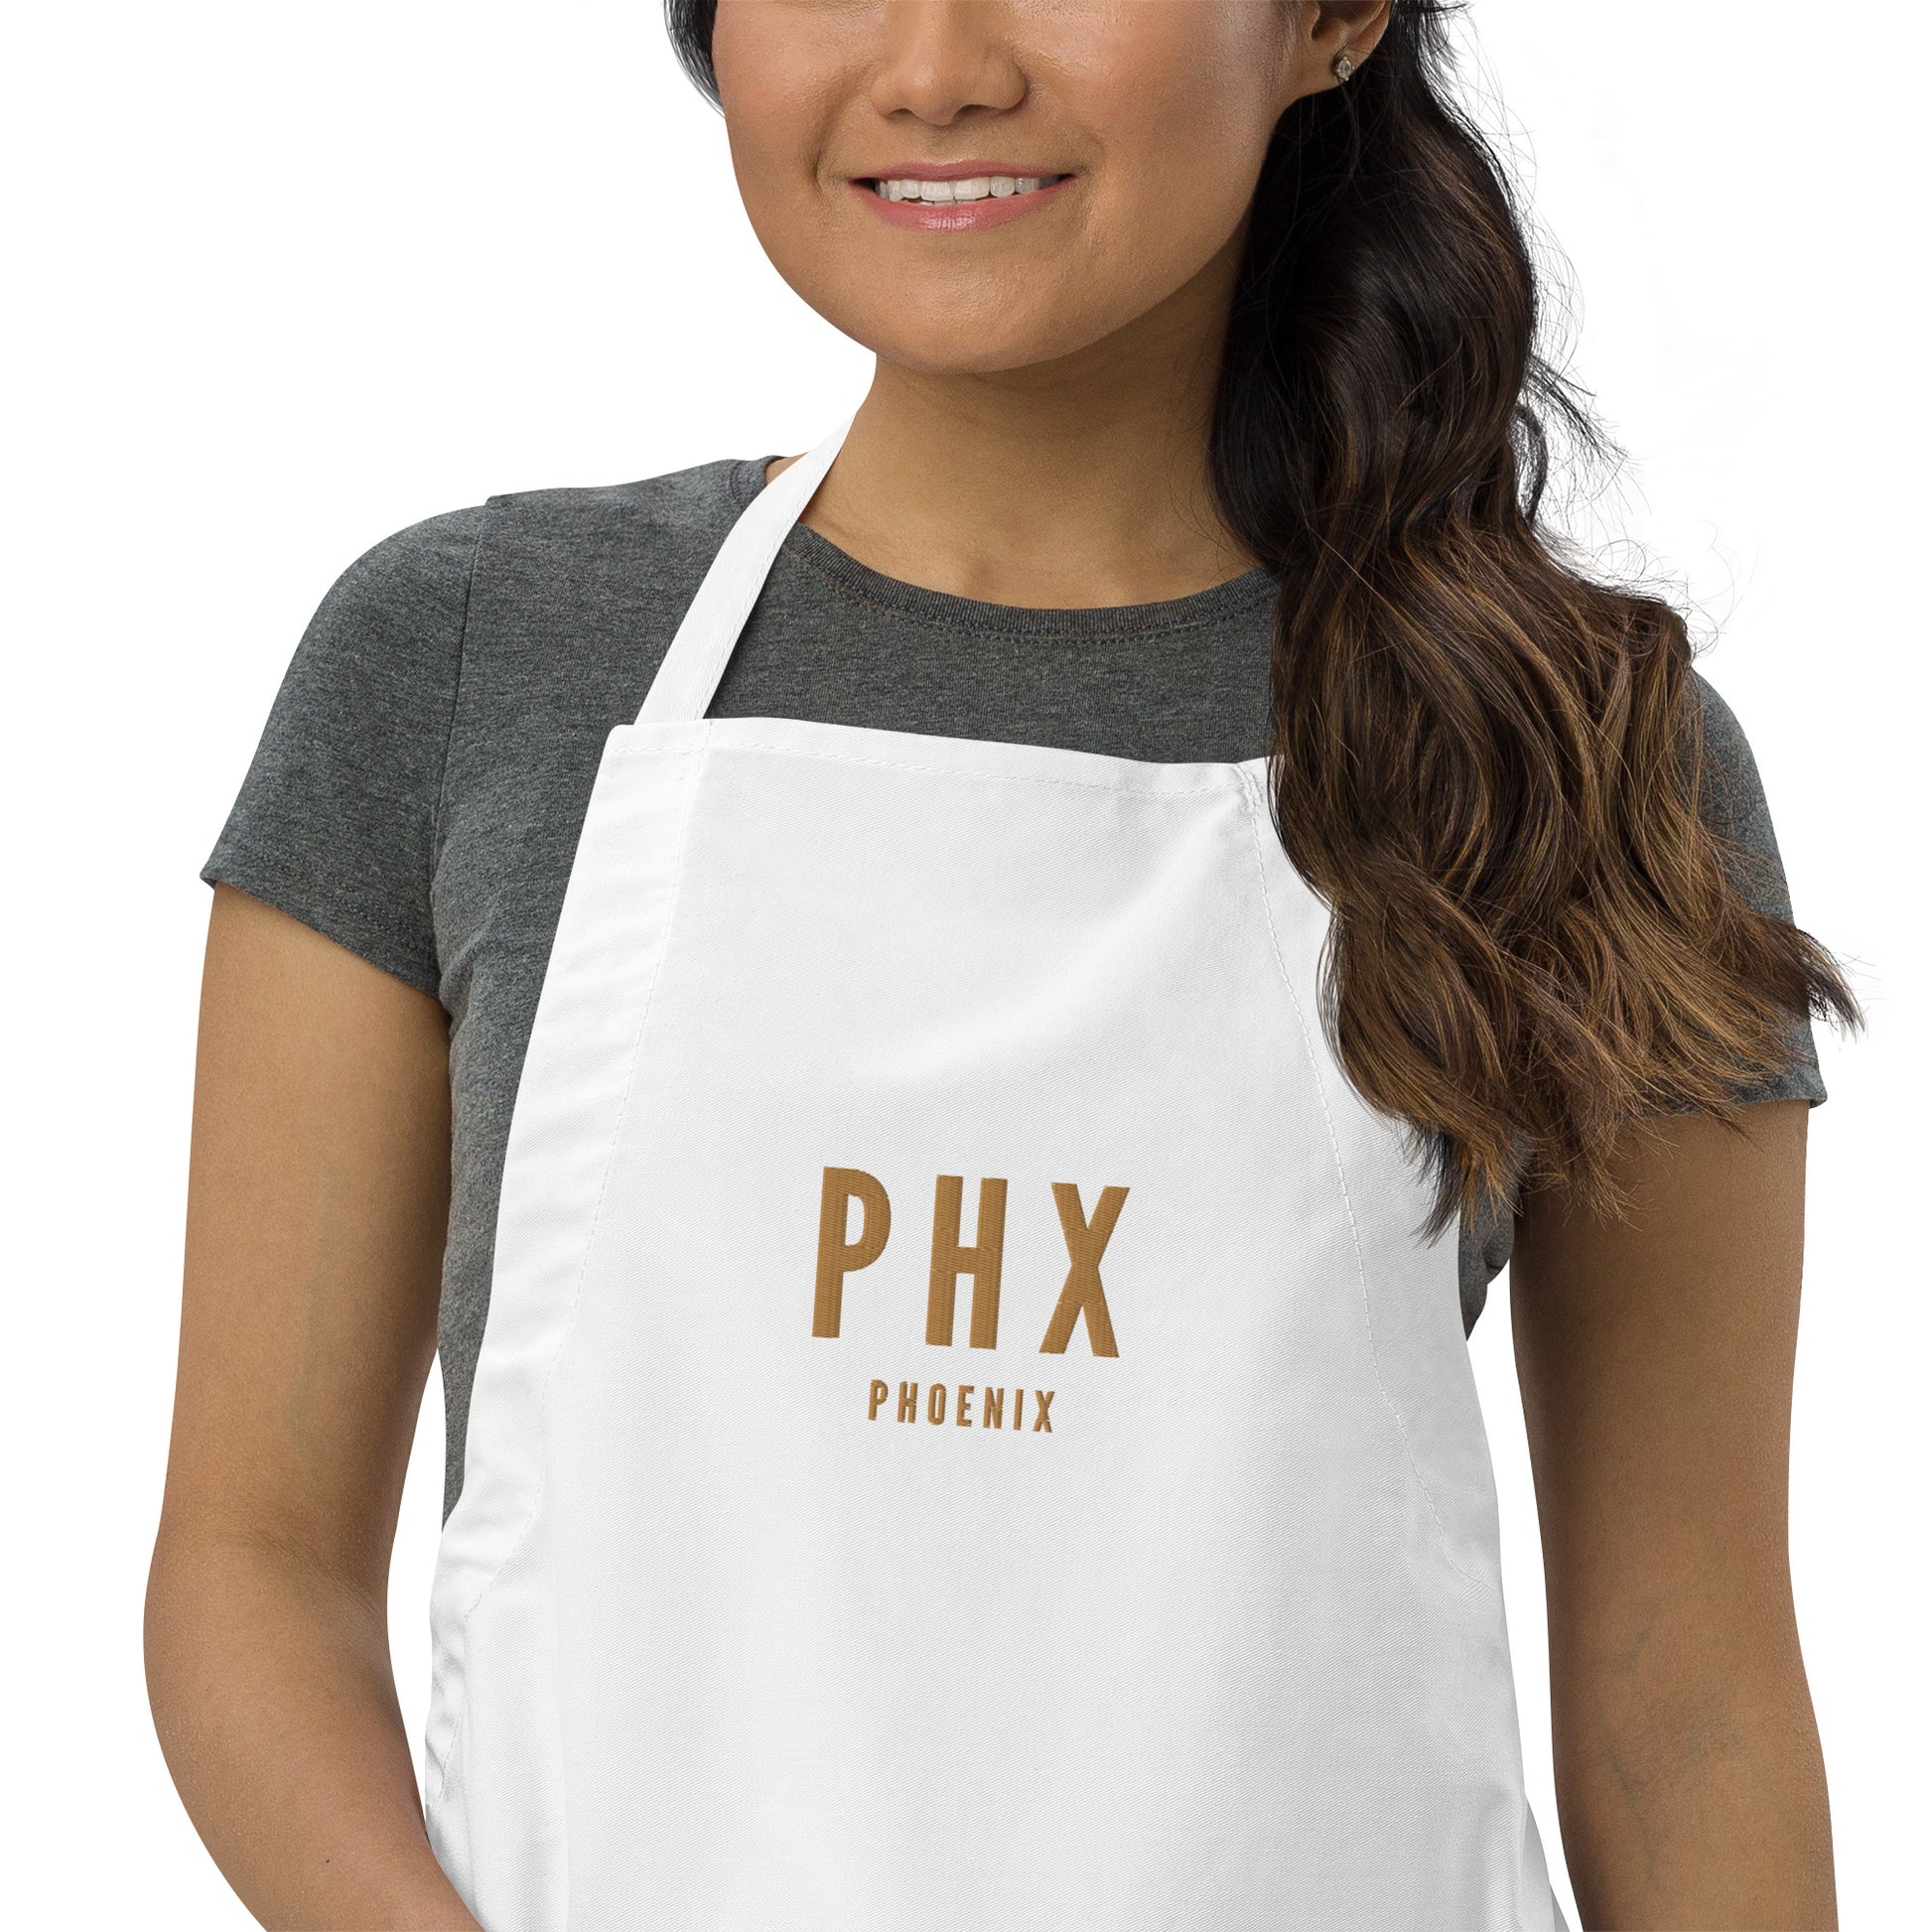 City Embroidered Apron - Old Gold • PHX Phoenix • YHM Designs - Image 08